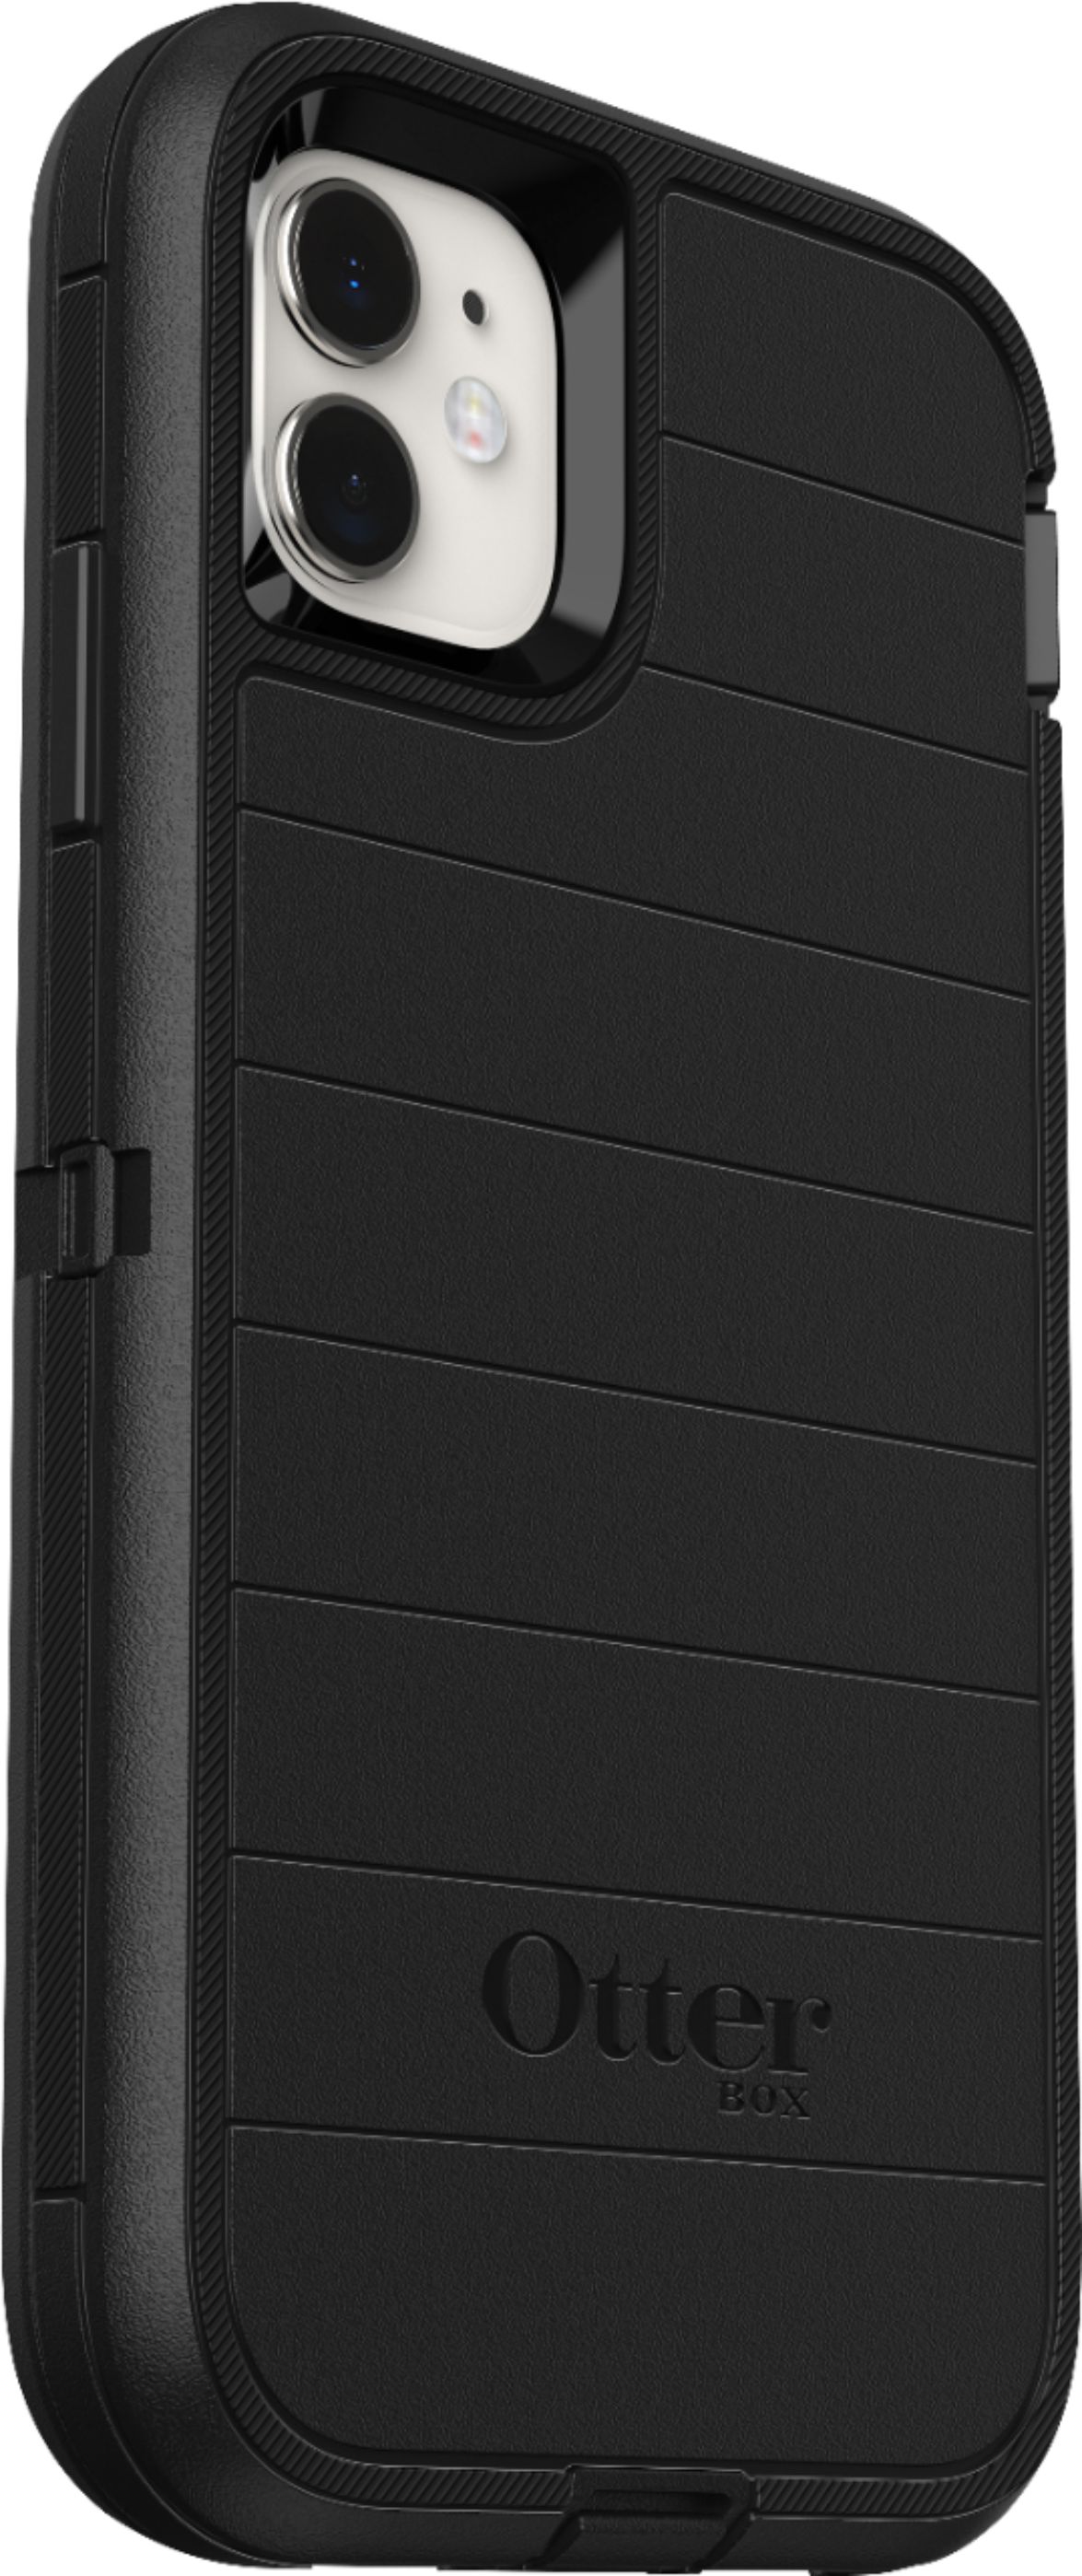 Angle View: OtterBox - Defender Pro Series Case for Apple® iPhone® 11/XR - Black